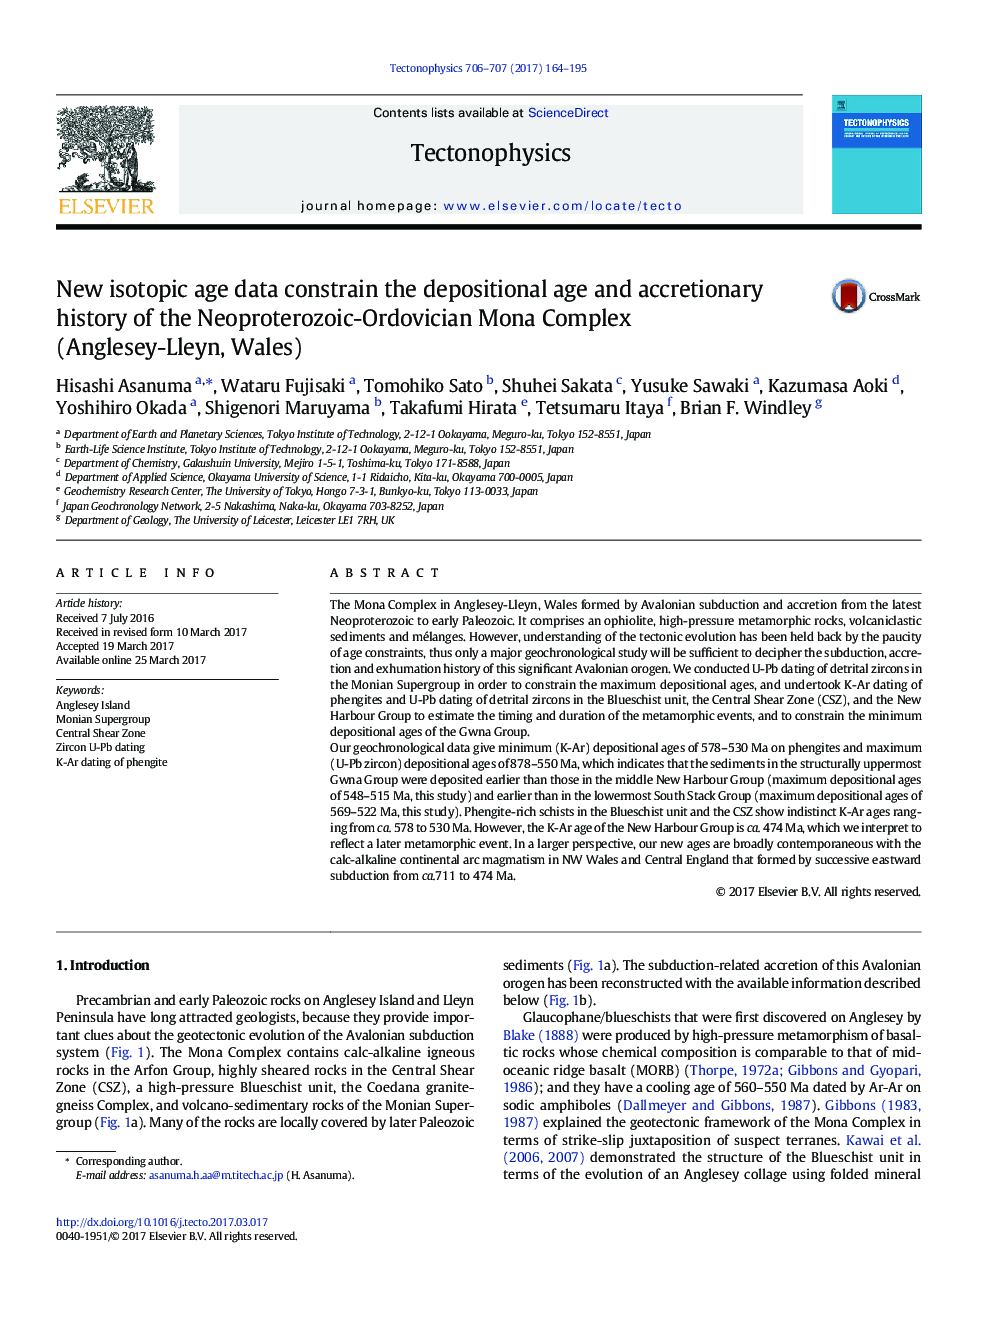 New isotopic age data constrain the depositional age and accretionary history of the Neoproterozoic-Ordovician Mona Complex (Anglesey-Lleyn, Wales)